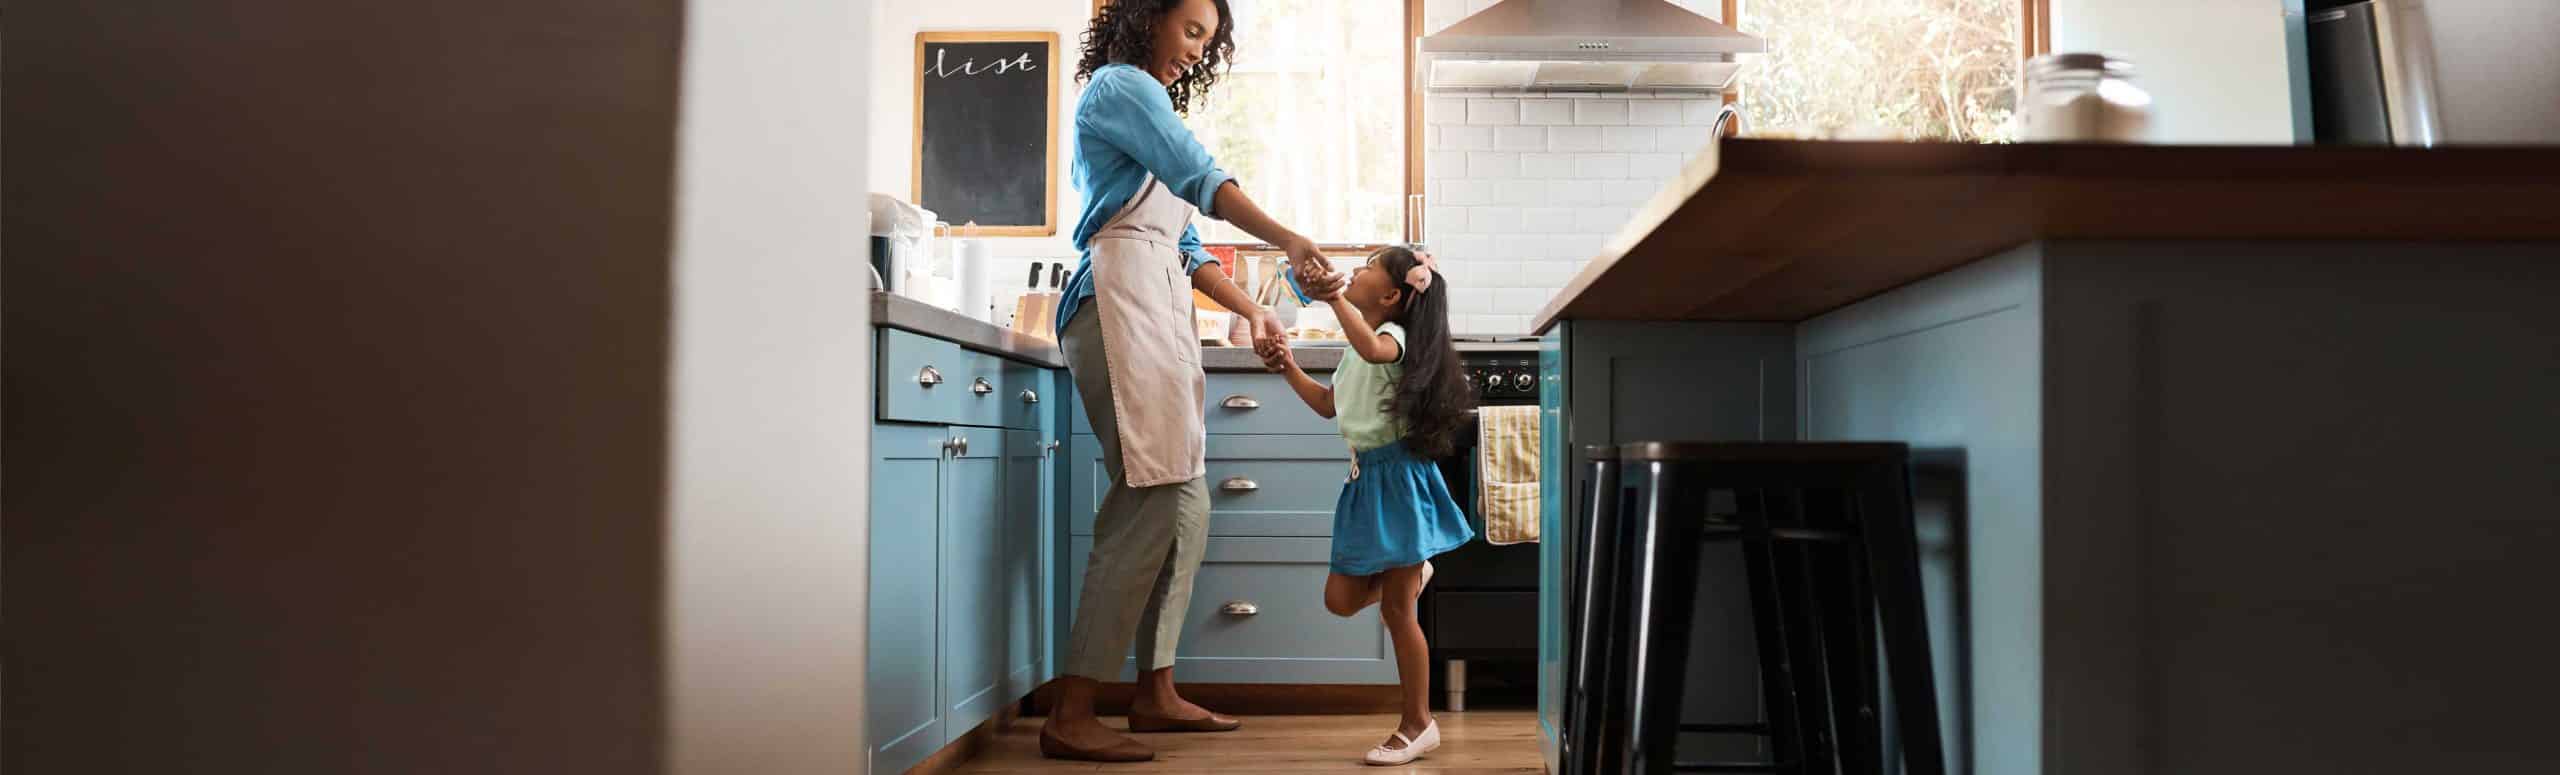 Mother in apron holding hands with her child dancing in the kitchen